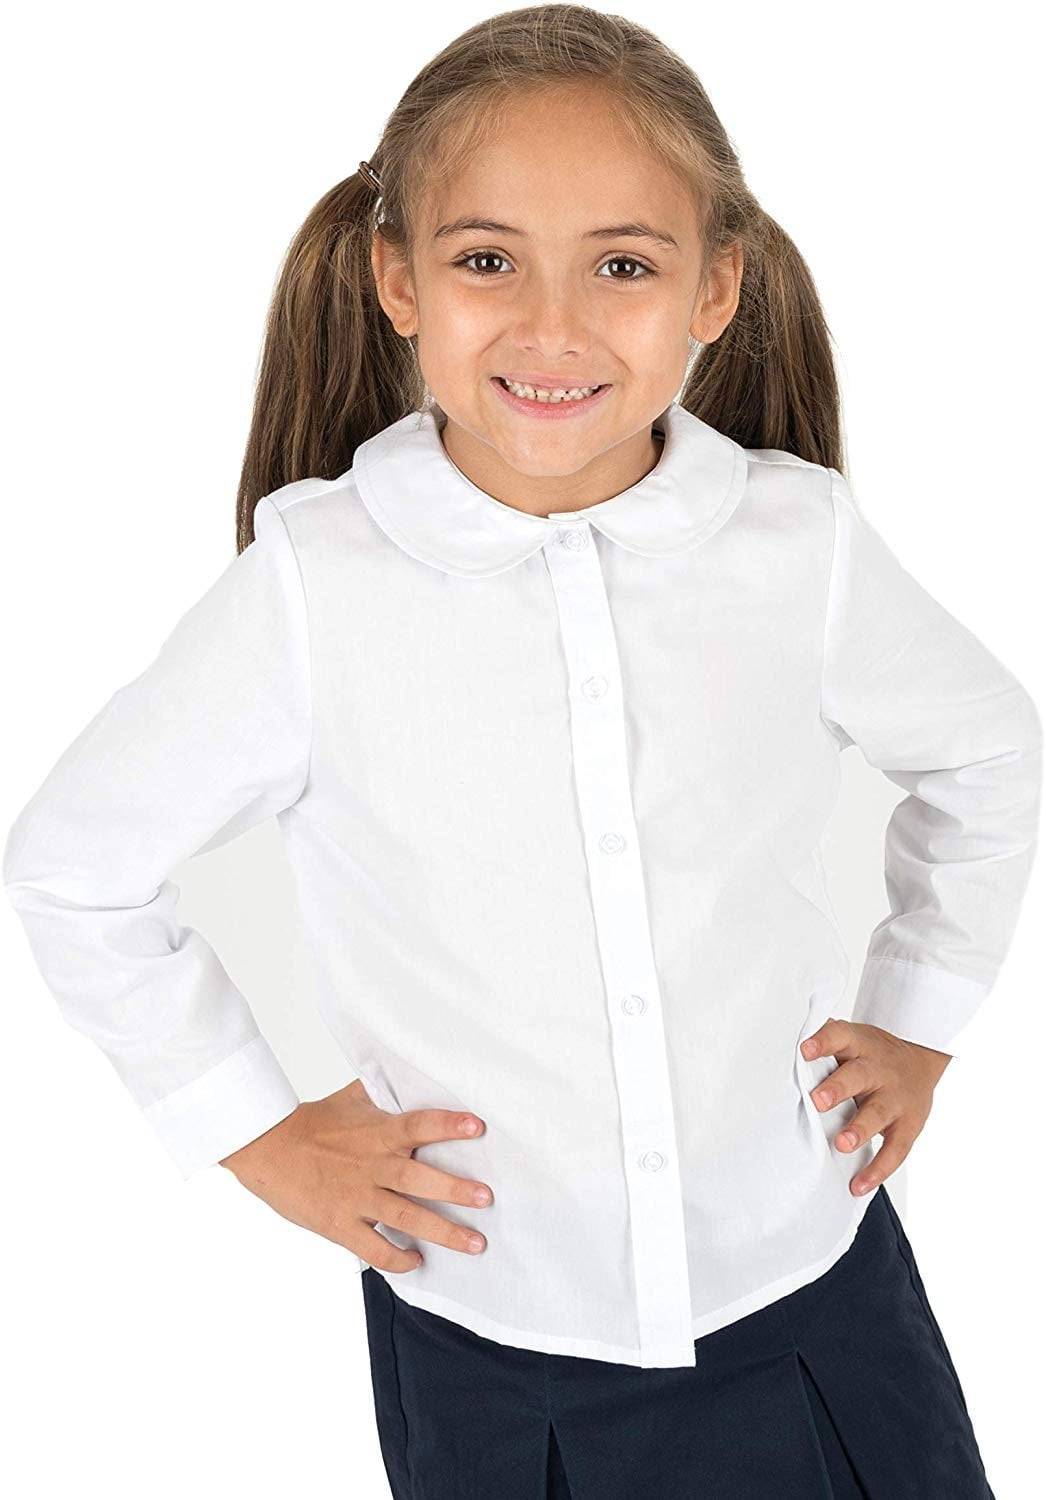 Loveble White Blouses for Girls Cute Fashion Floral Print Shorts for 3-8 Years